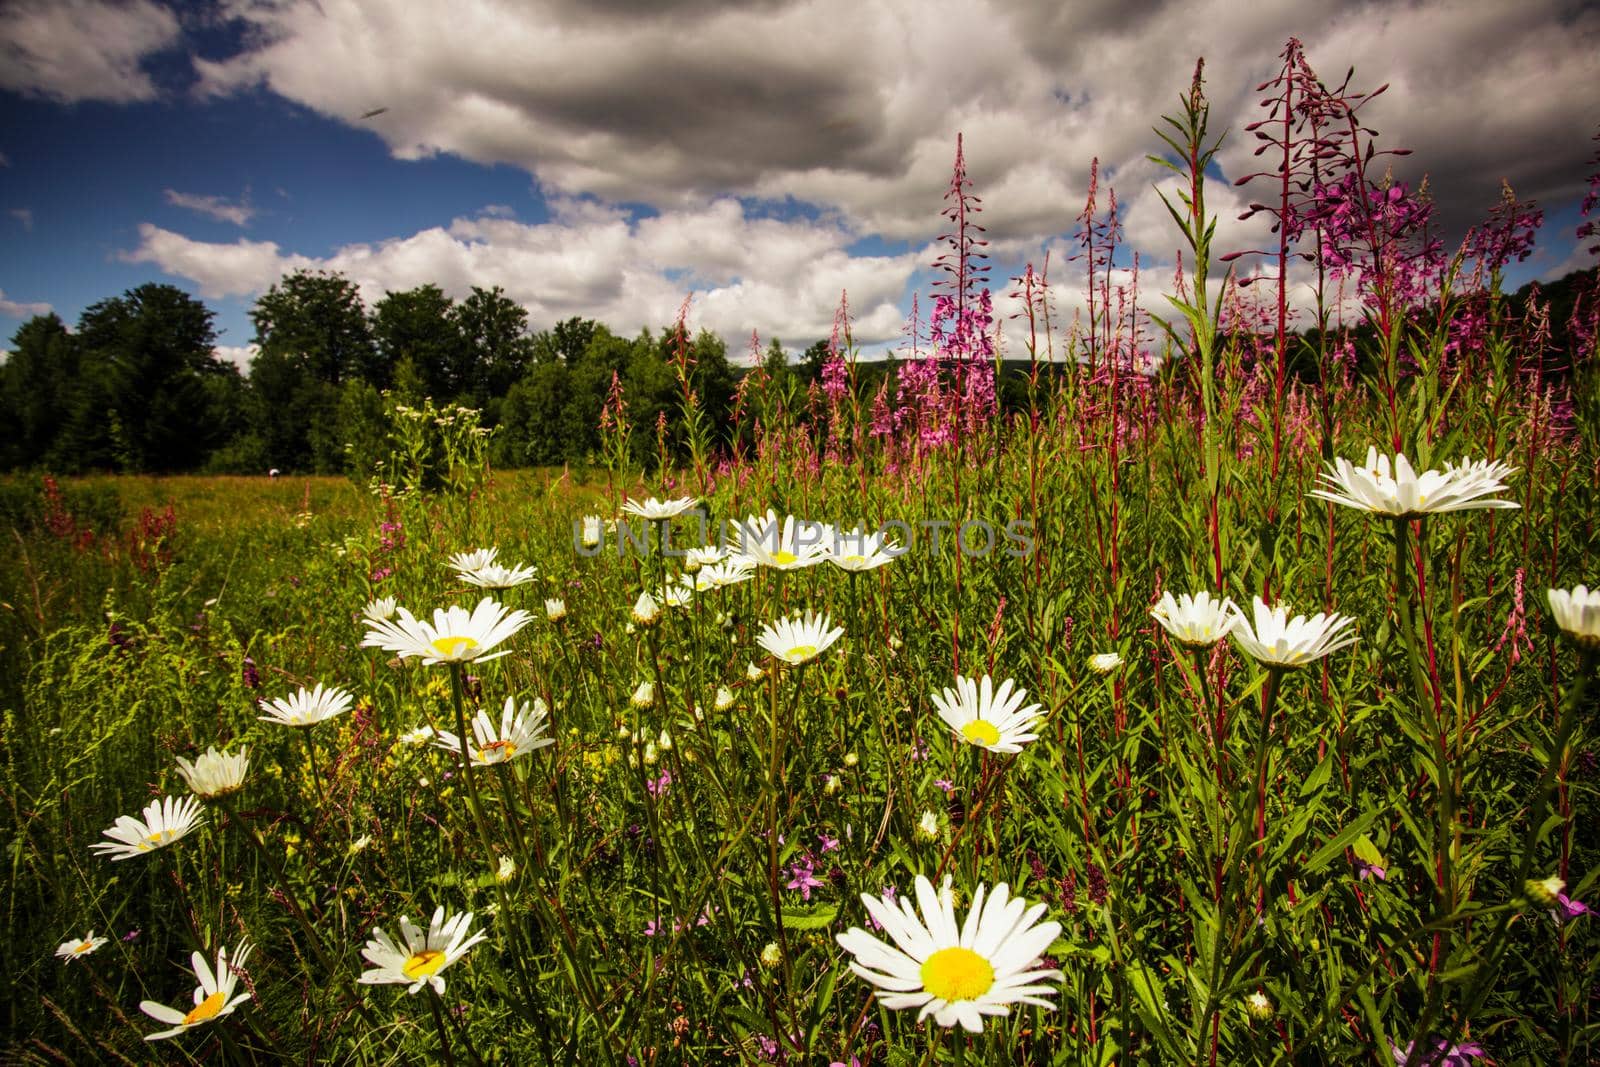 Wild flowers near the lake and sky landscape